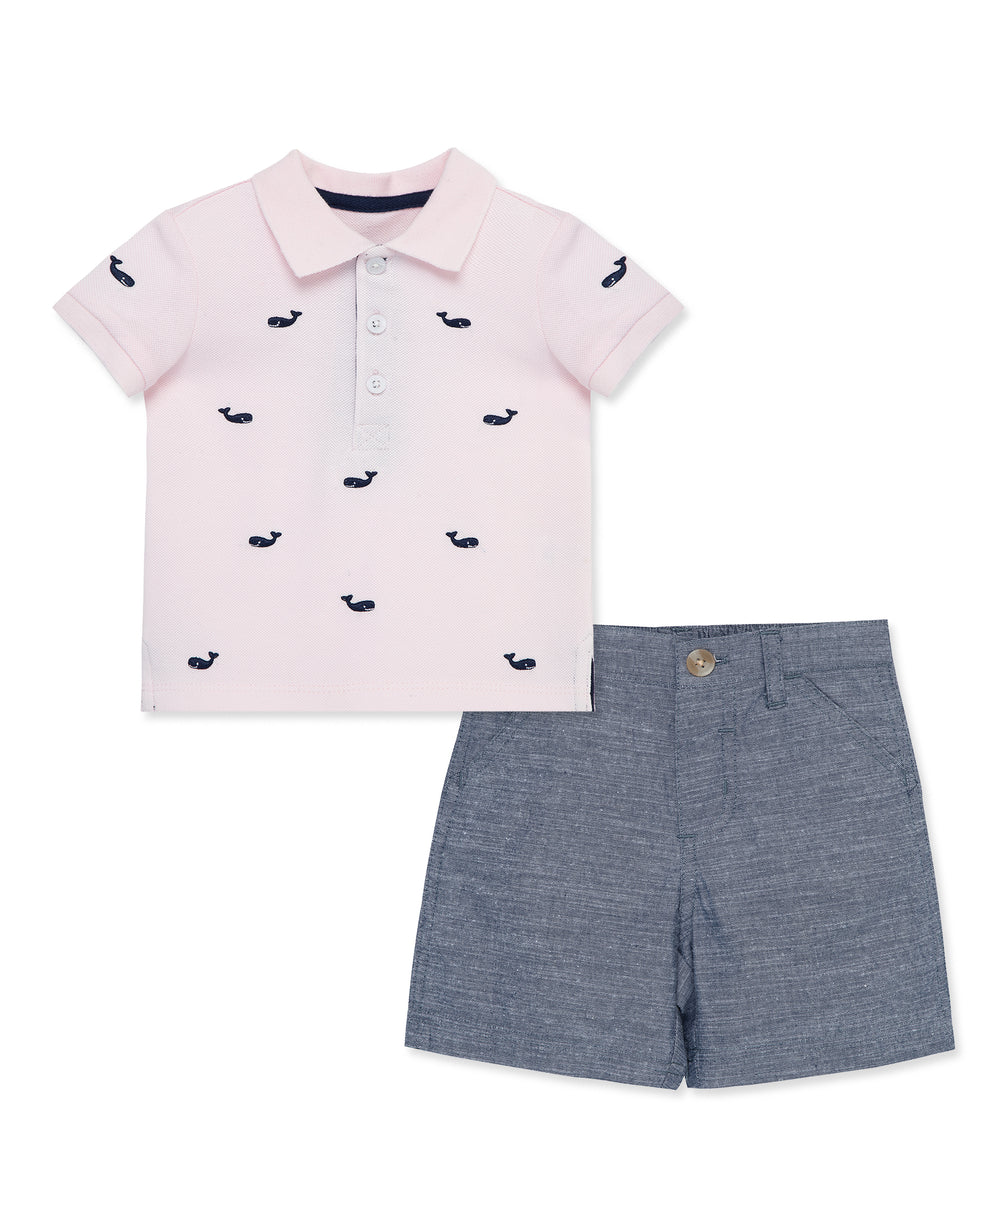 Whale Of A Party Polo and Short Set